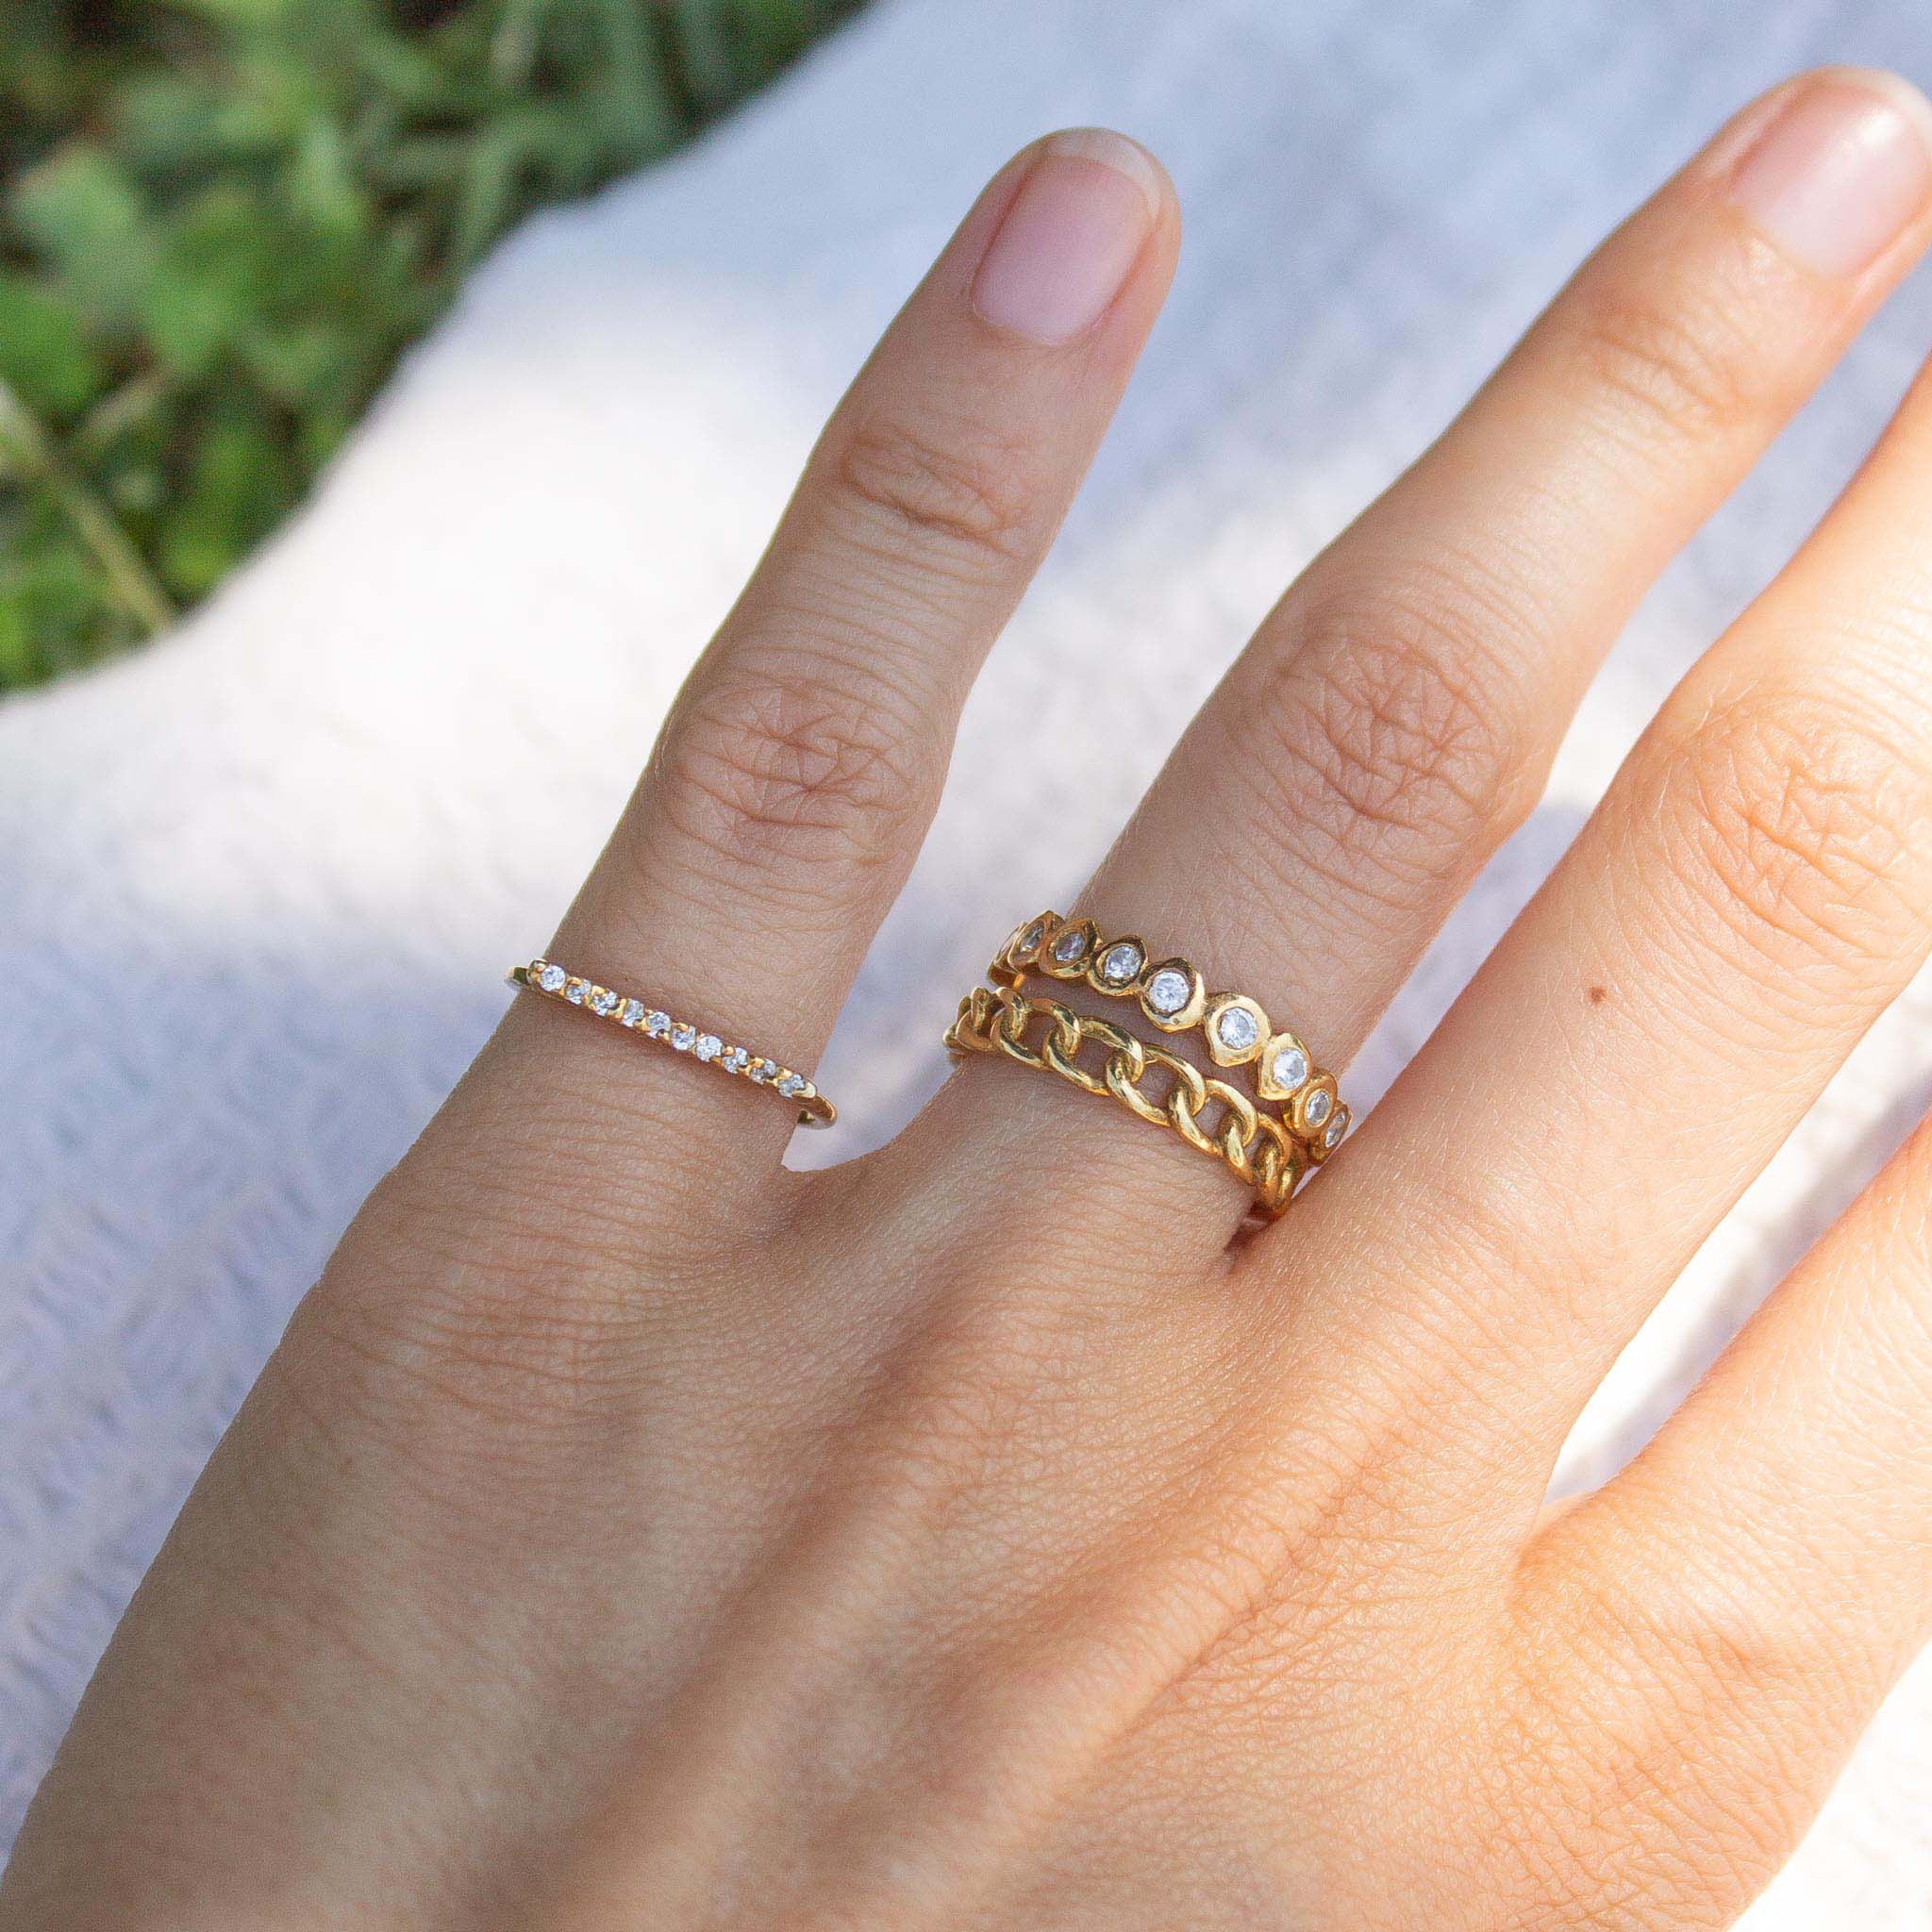 Sparkly stacking ring idea